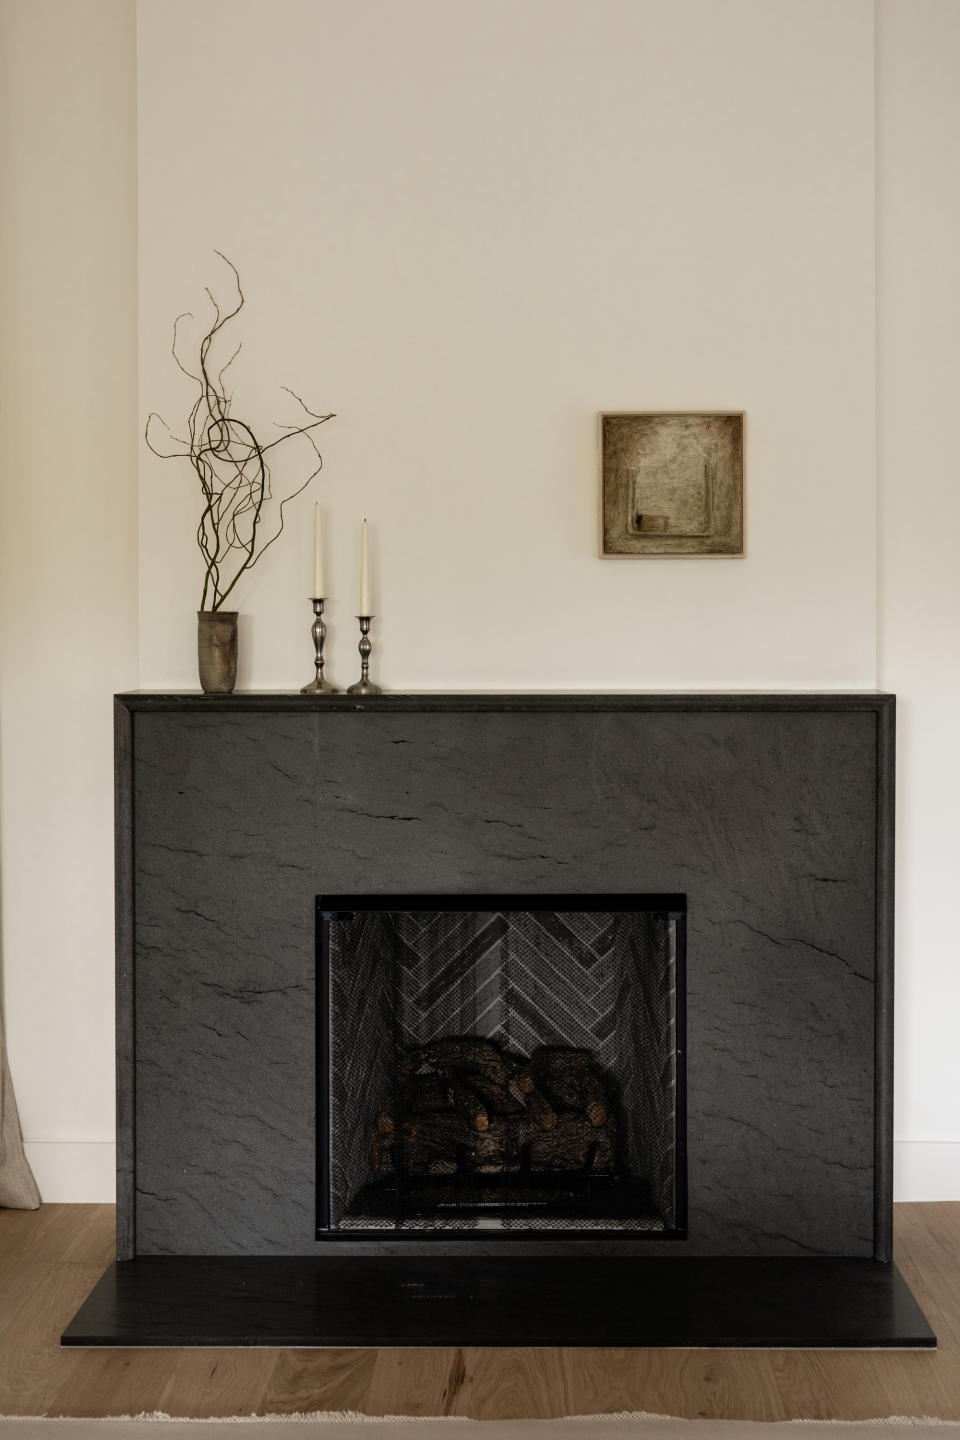 A living room fireplace with undersized wall art